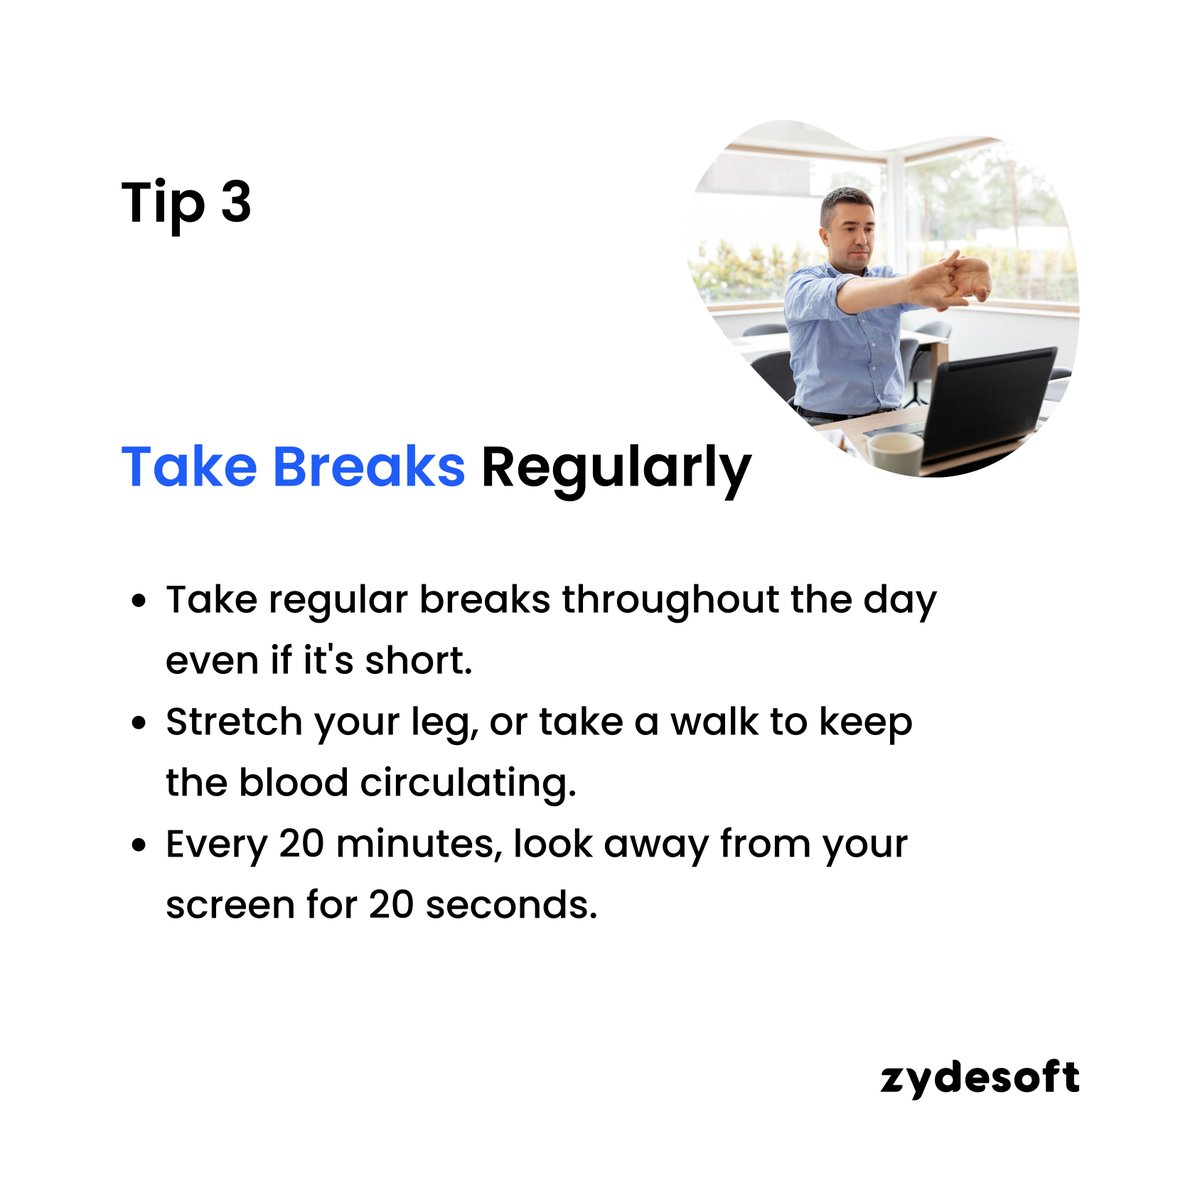 Stay productive and healthy while working remotely with our three productivity-boosting tips. Swipe through our carousel post to find out how a dedicated workspace, structured planning, and regular breaks can transform your day.

#remotejob #remoteworker #productivitytips